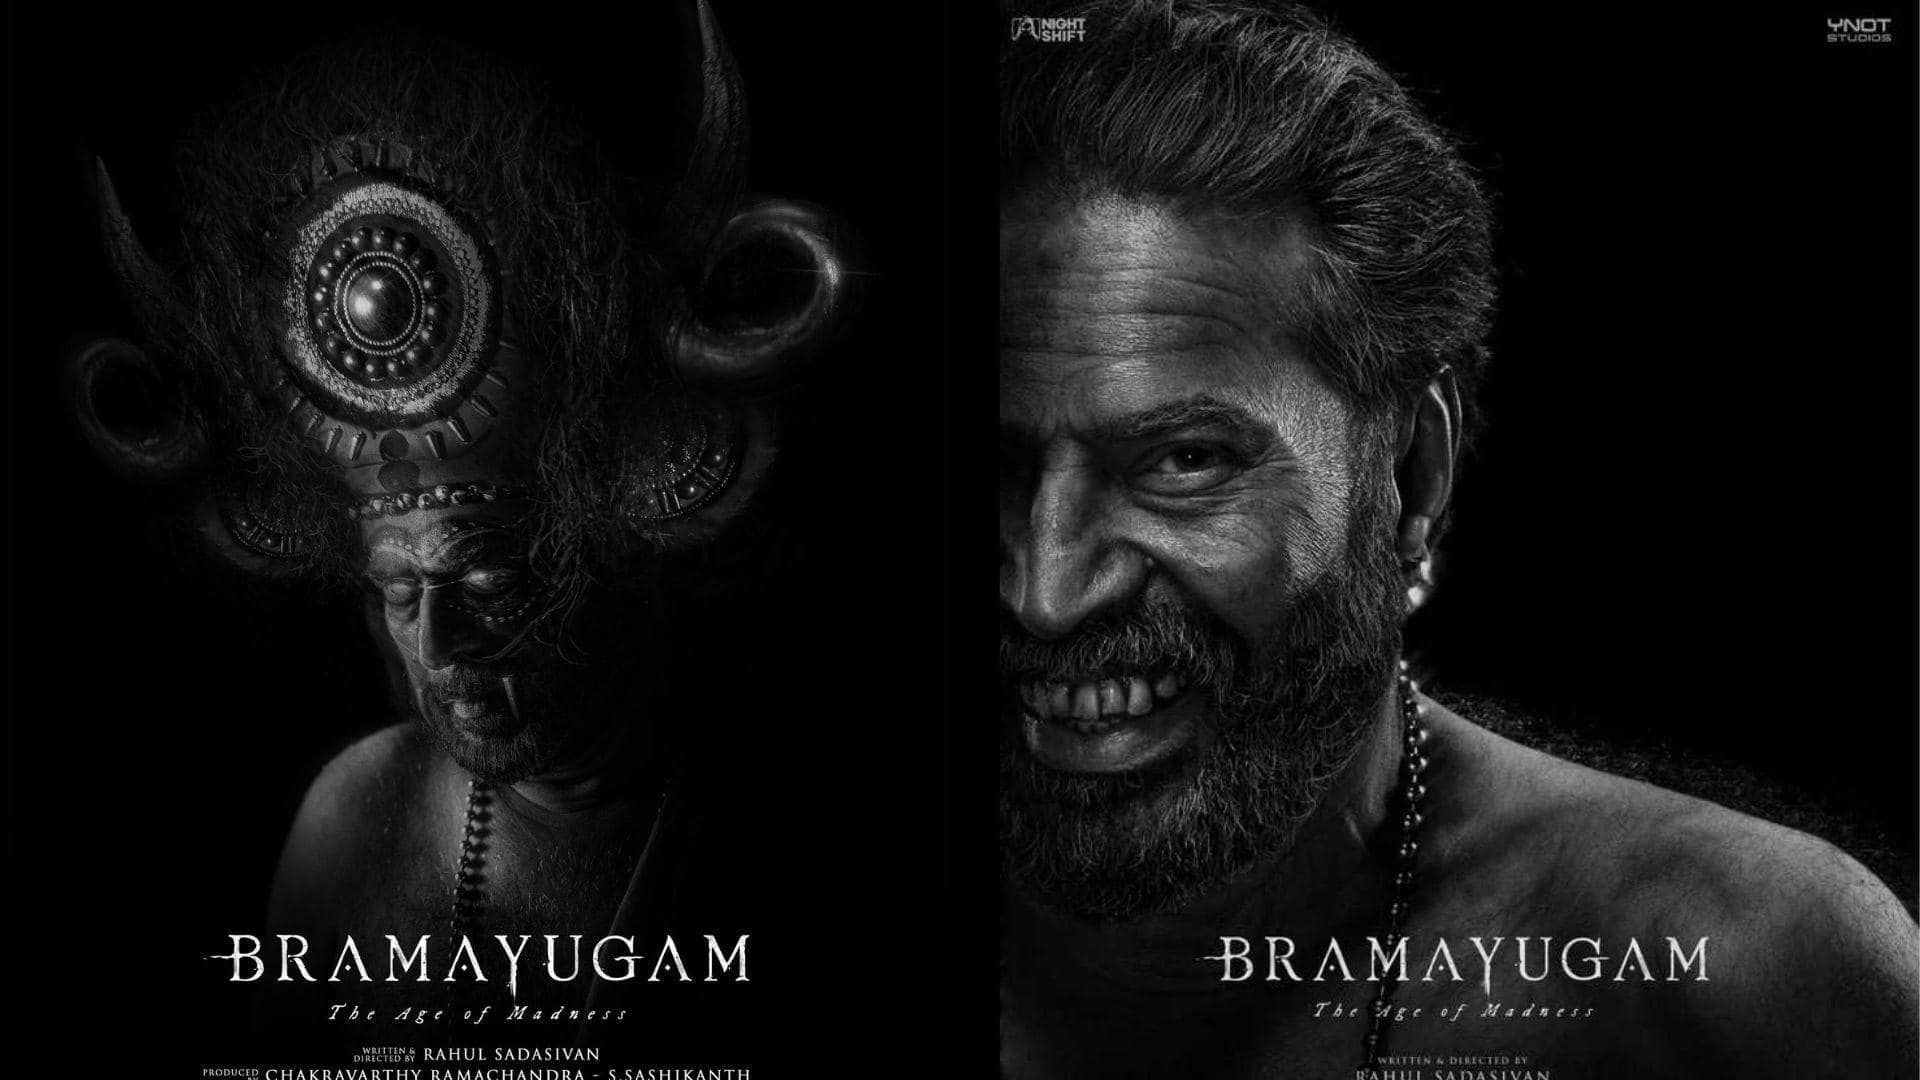 'Bramayugam': Mammootty's terrifying transformation unveiled in new poster